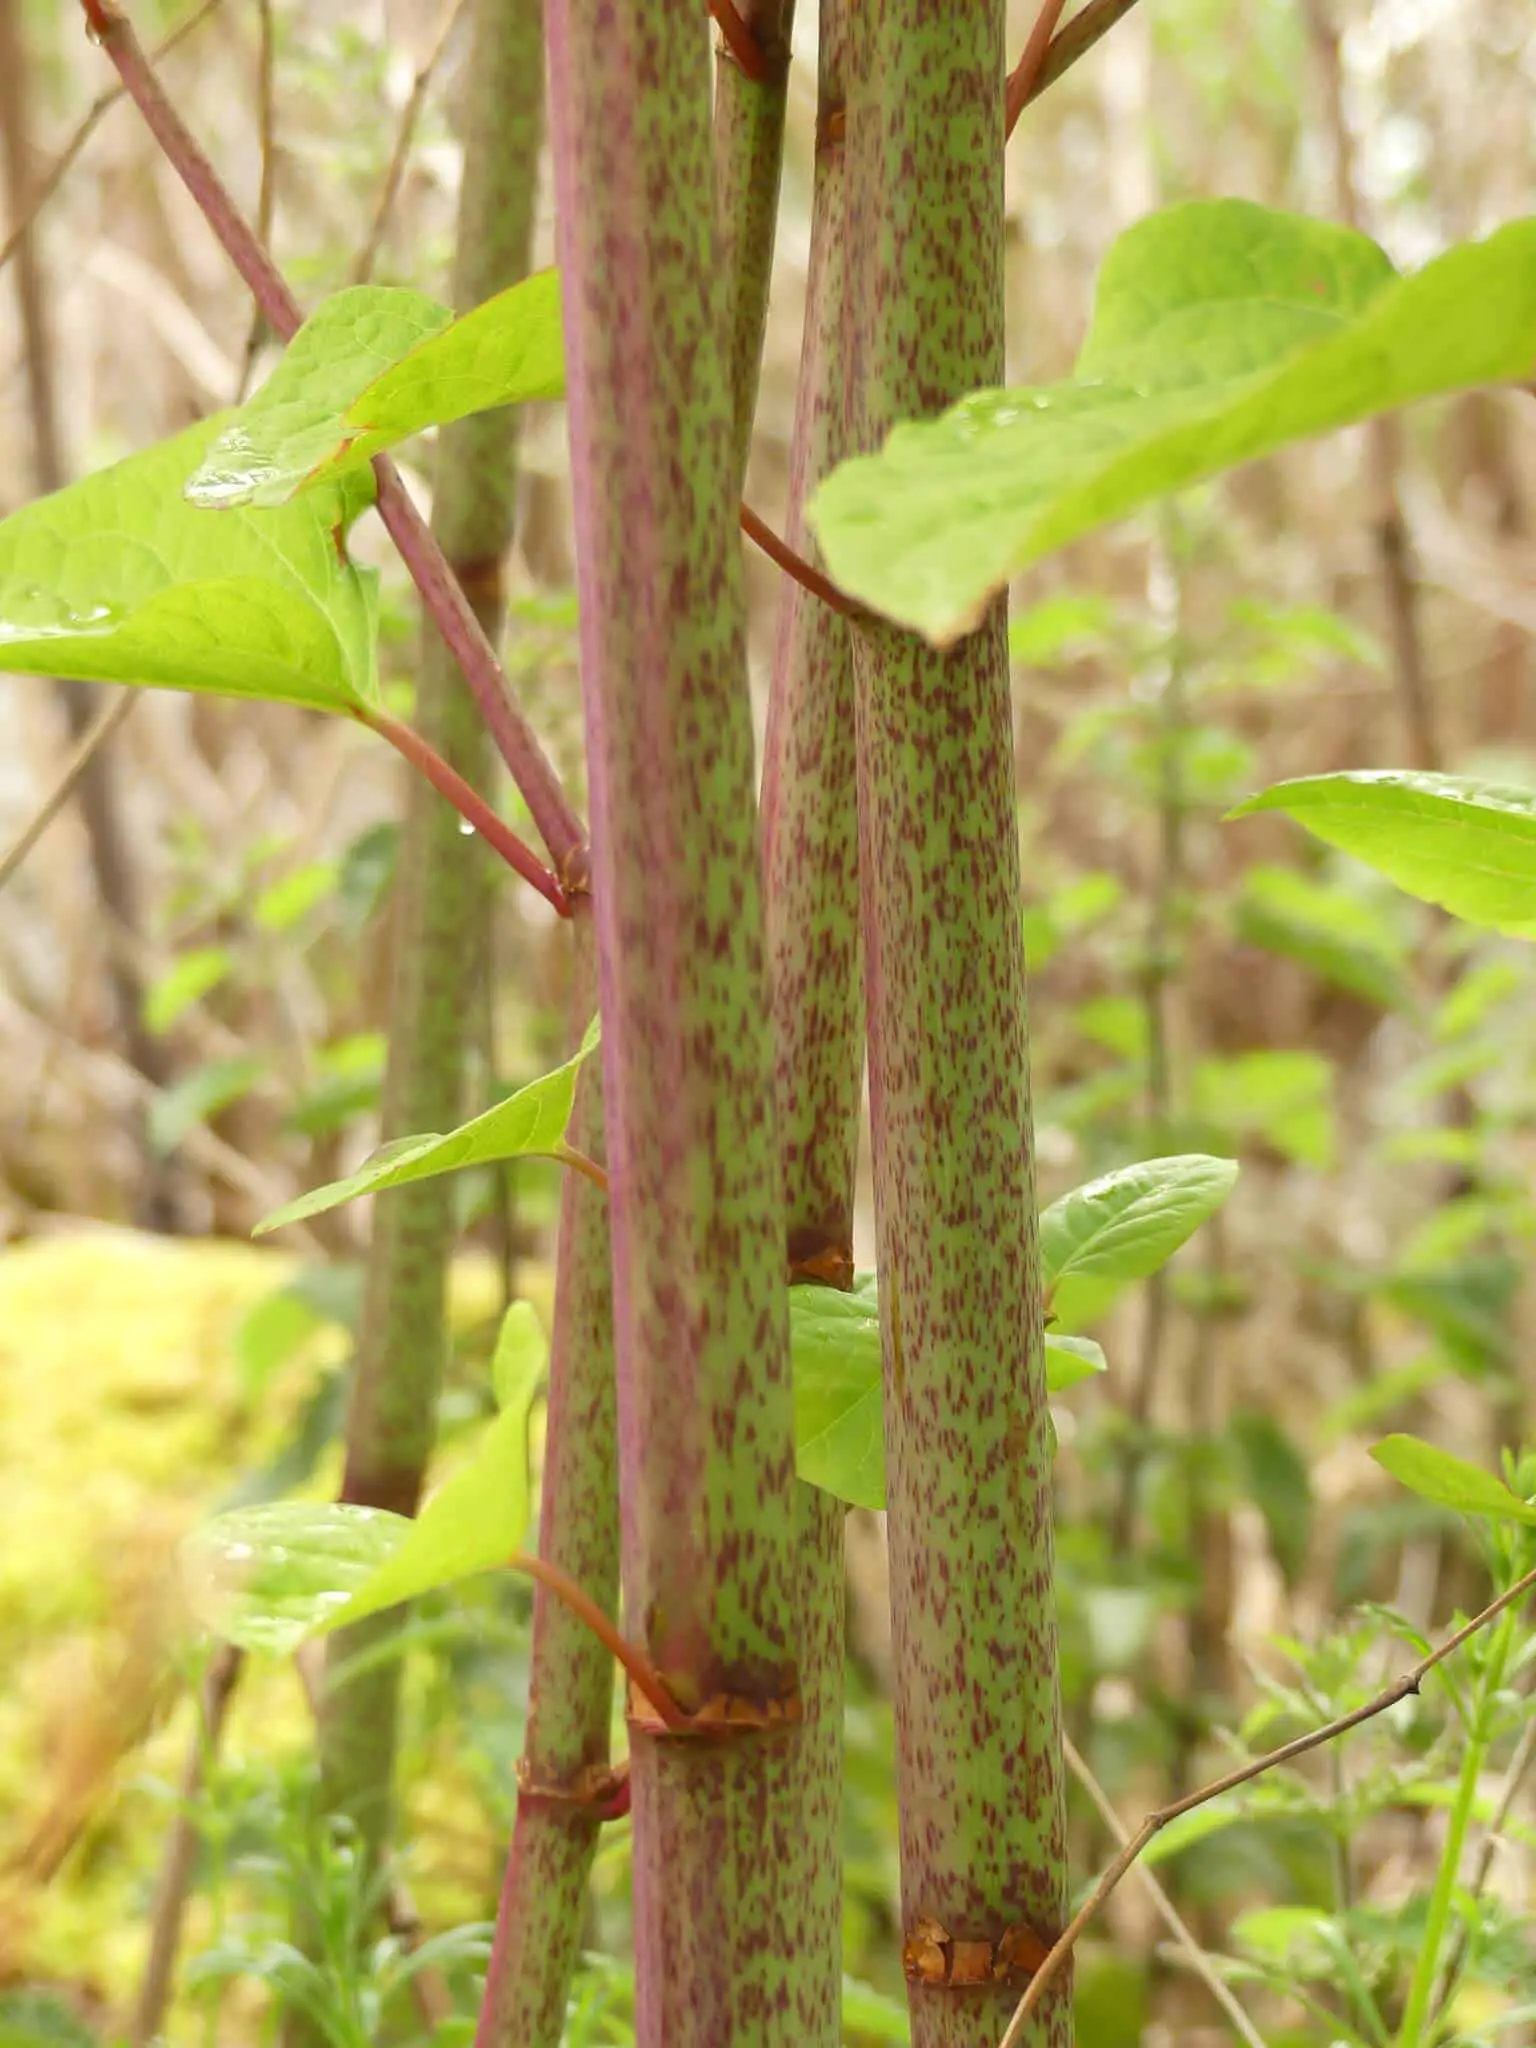 Tall stems of Japanese knotweed is just one of its characteristics. Growing up to 3m in height